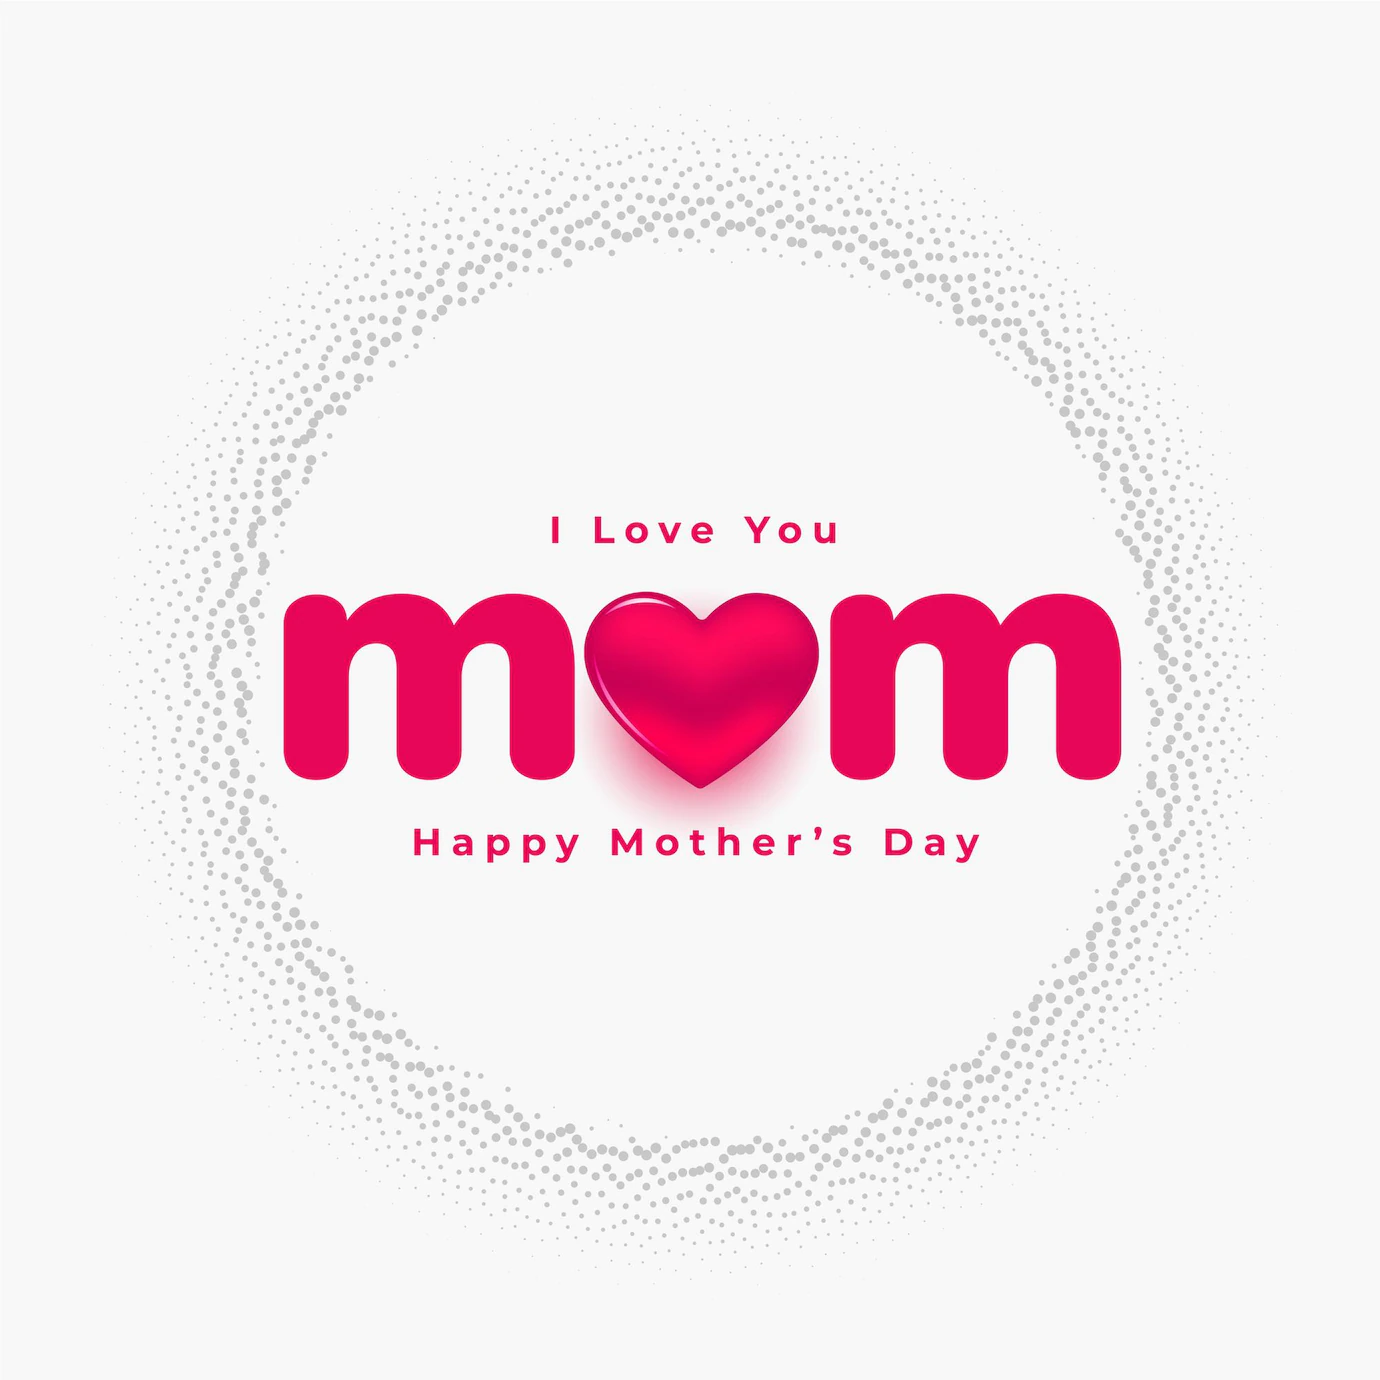 Love You Mom Mothers Day Beautiful Card Design 1017 31652